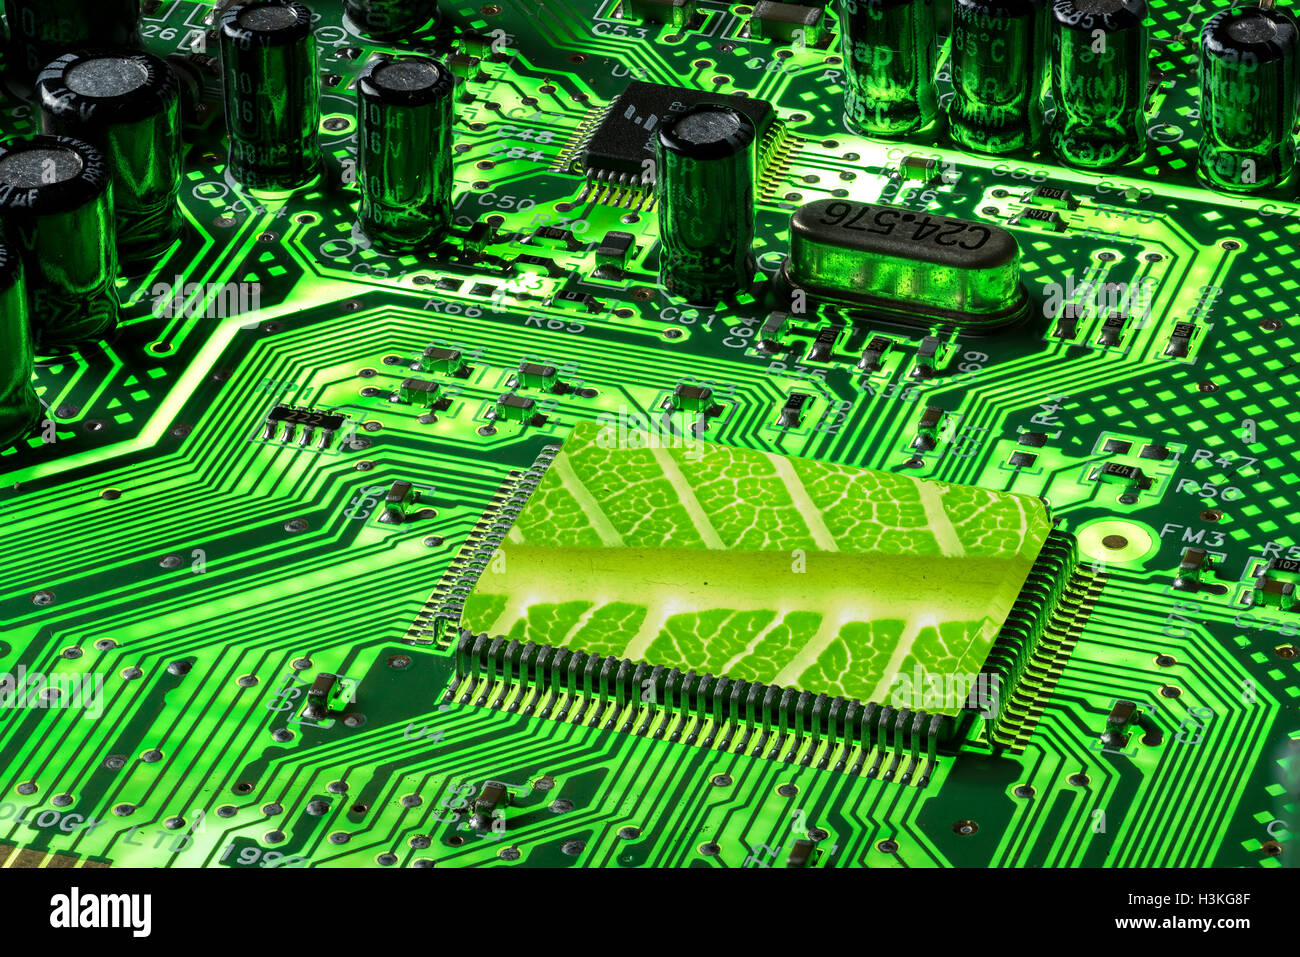 Fluorescent, glow-in-the-dark green motherboard with a leaf texture CPU Stock Photo